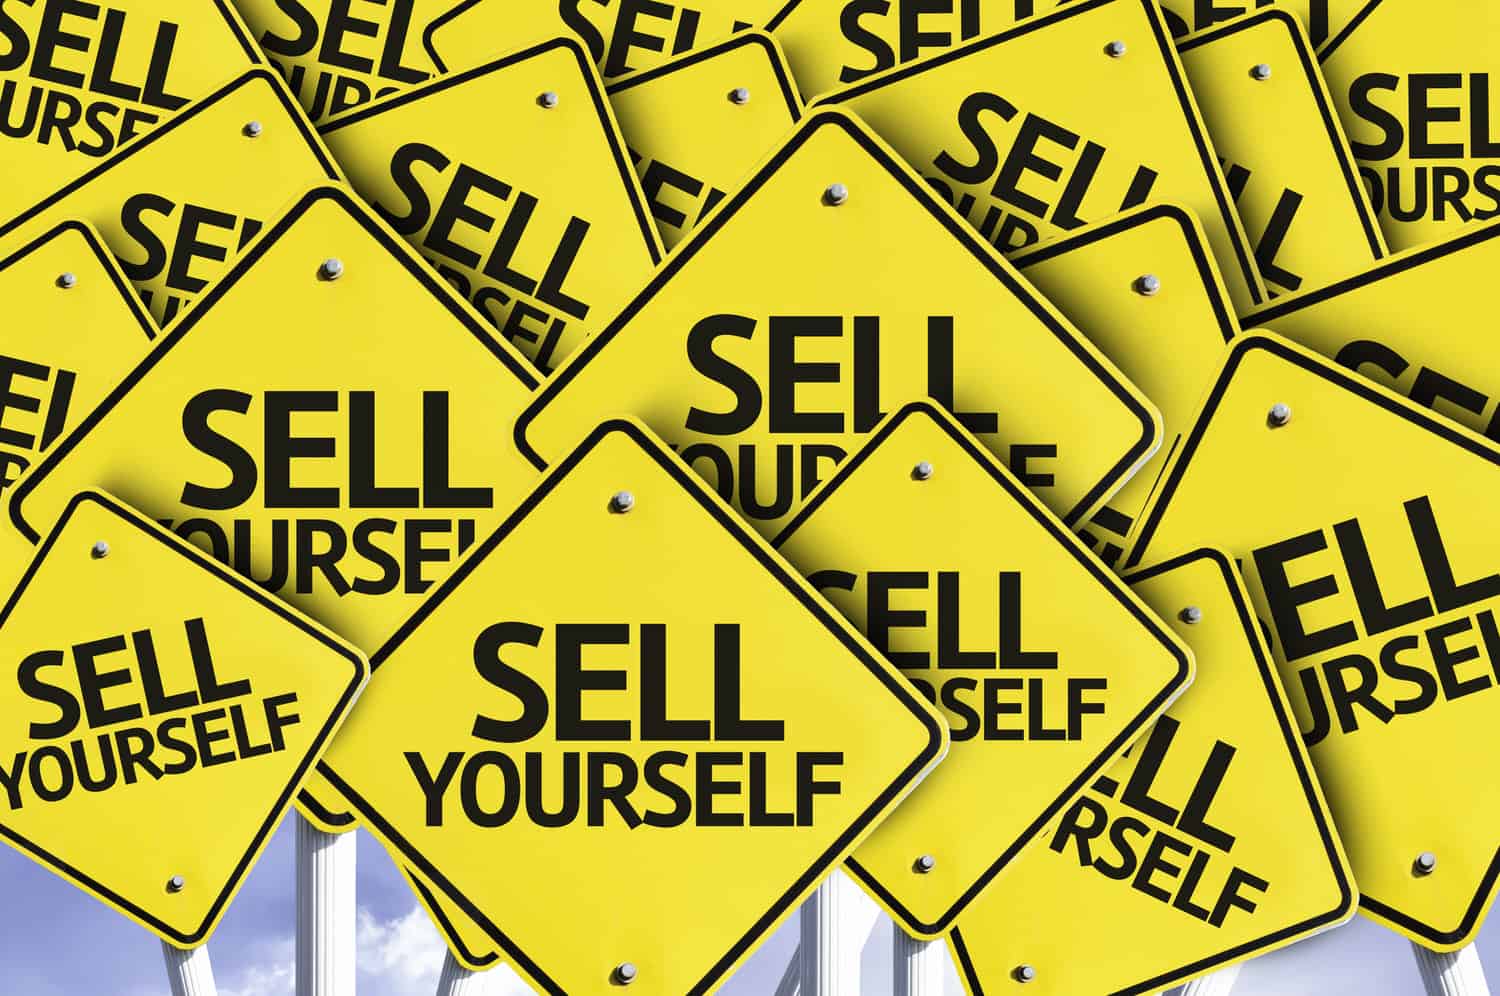 Sell Yourself written on multiple road sign